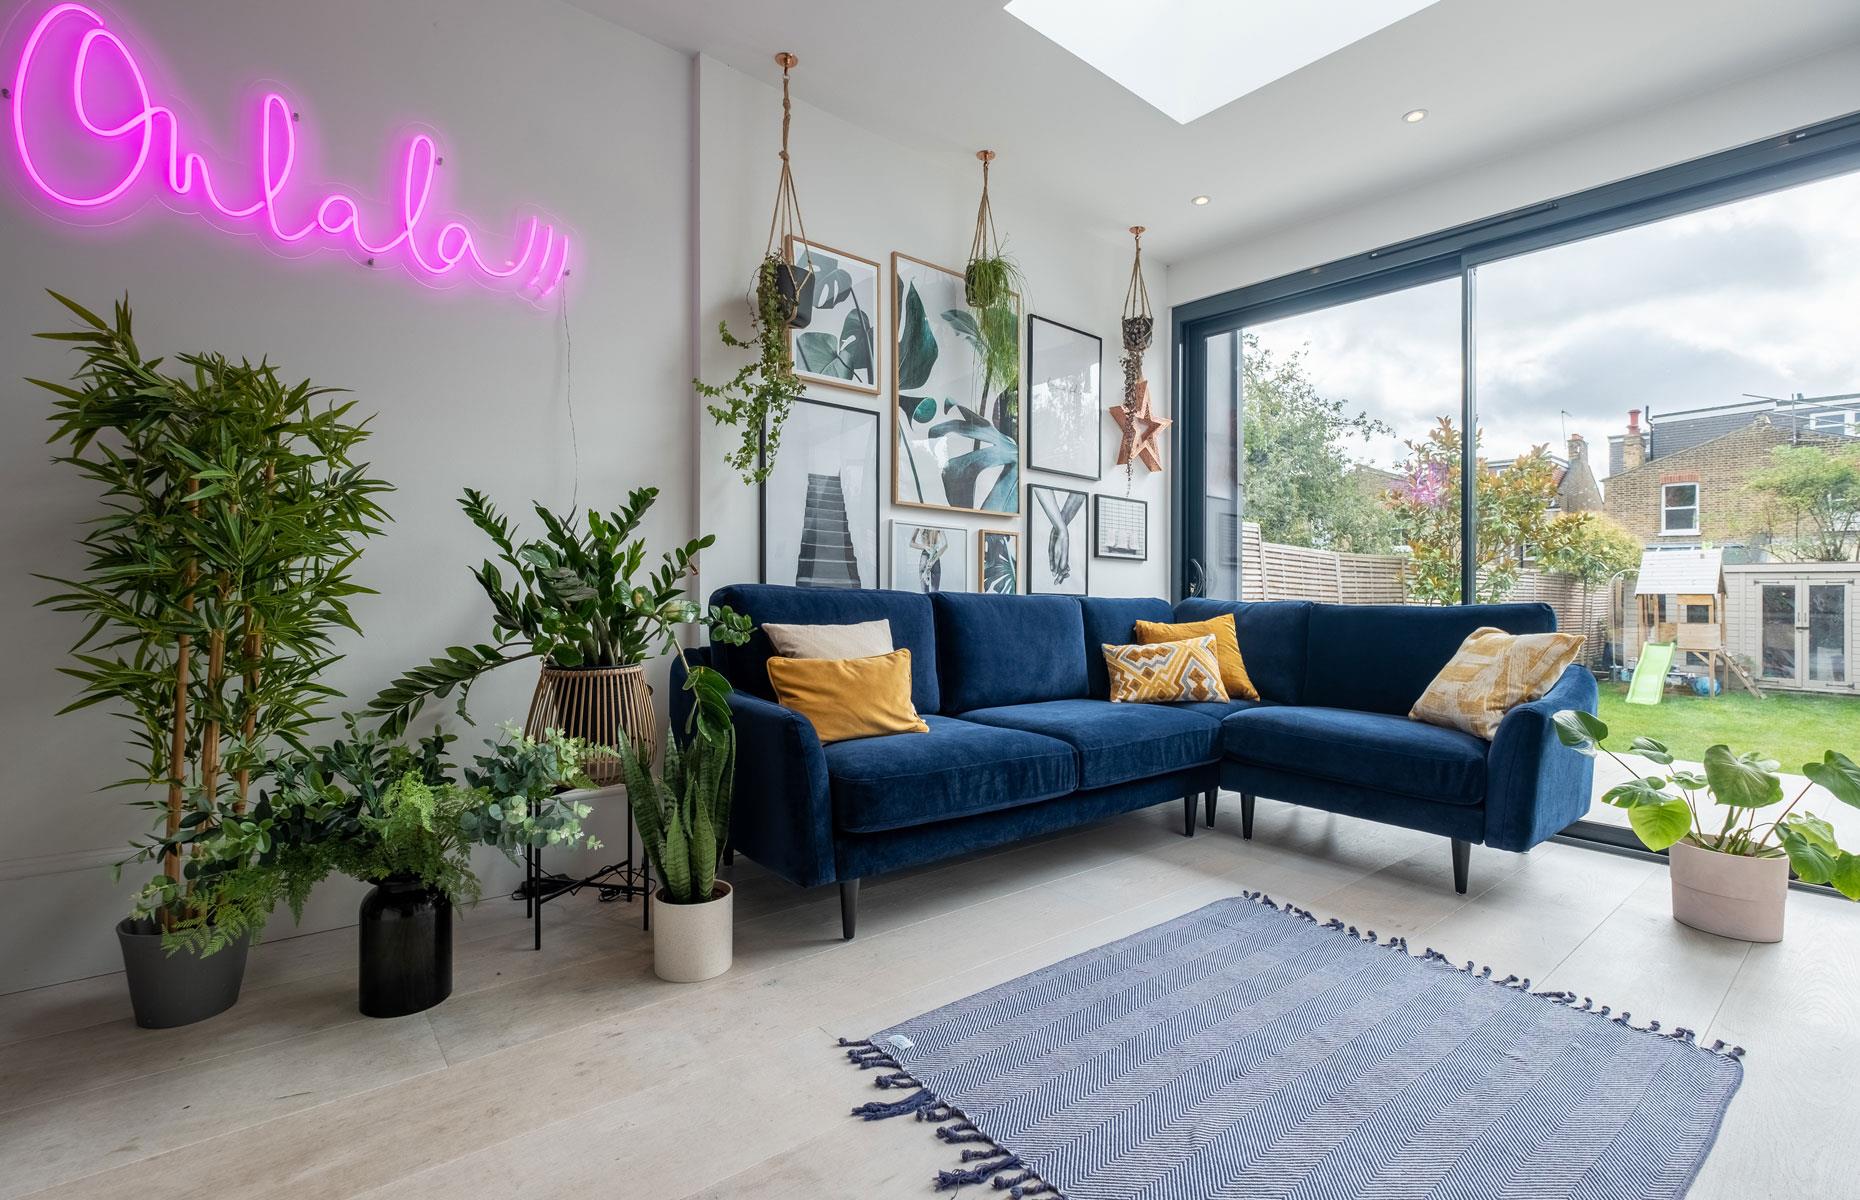 <p>Use wall art to visually divide open-plan areas into discreet zones. Gallery walls with family photographs will personalize your living areas, whereas neon wall lighting looks quirky and adds atmosphere to dining or home office areas.</p>